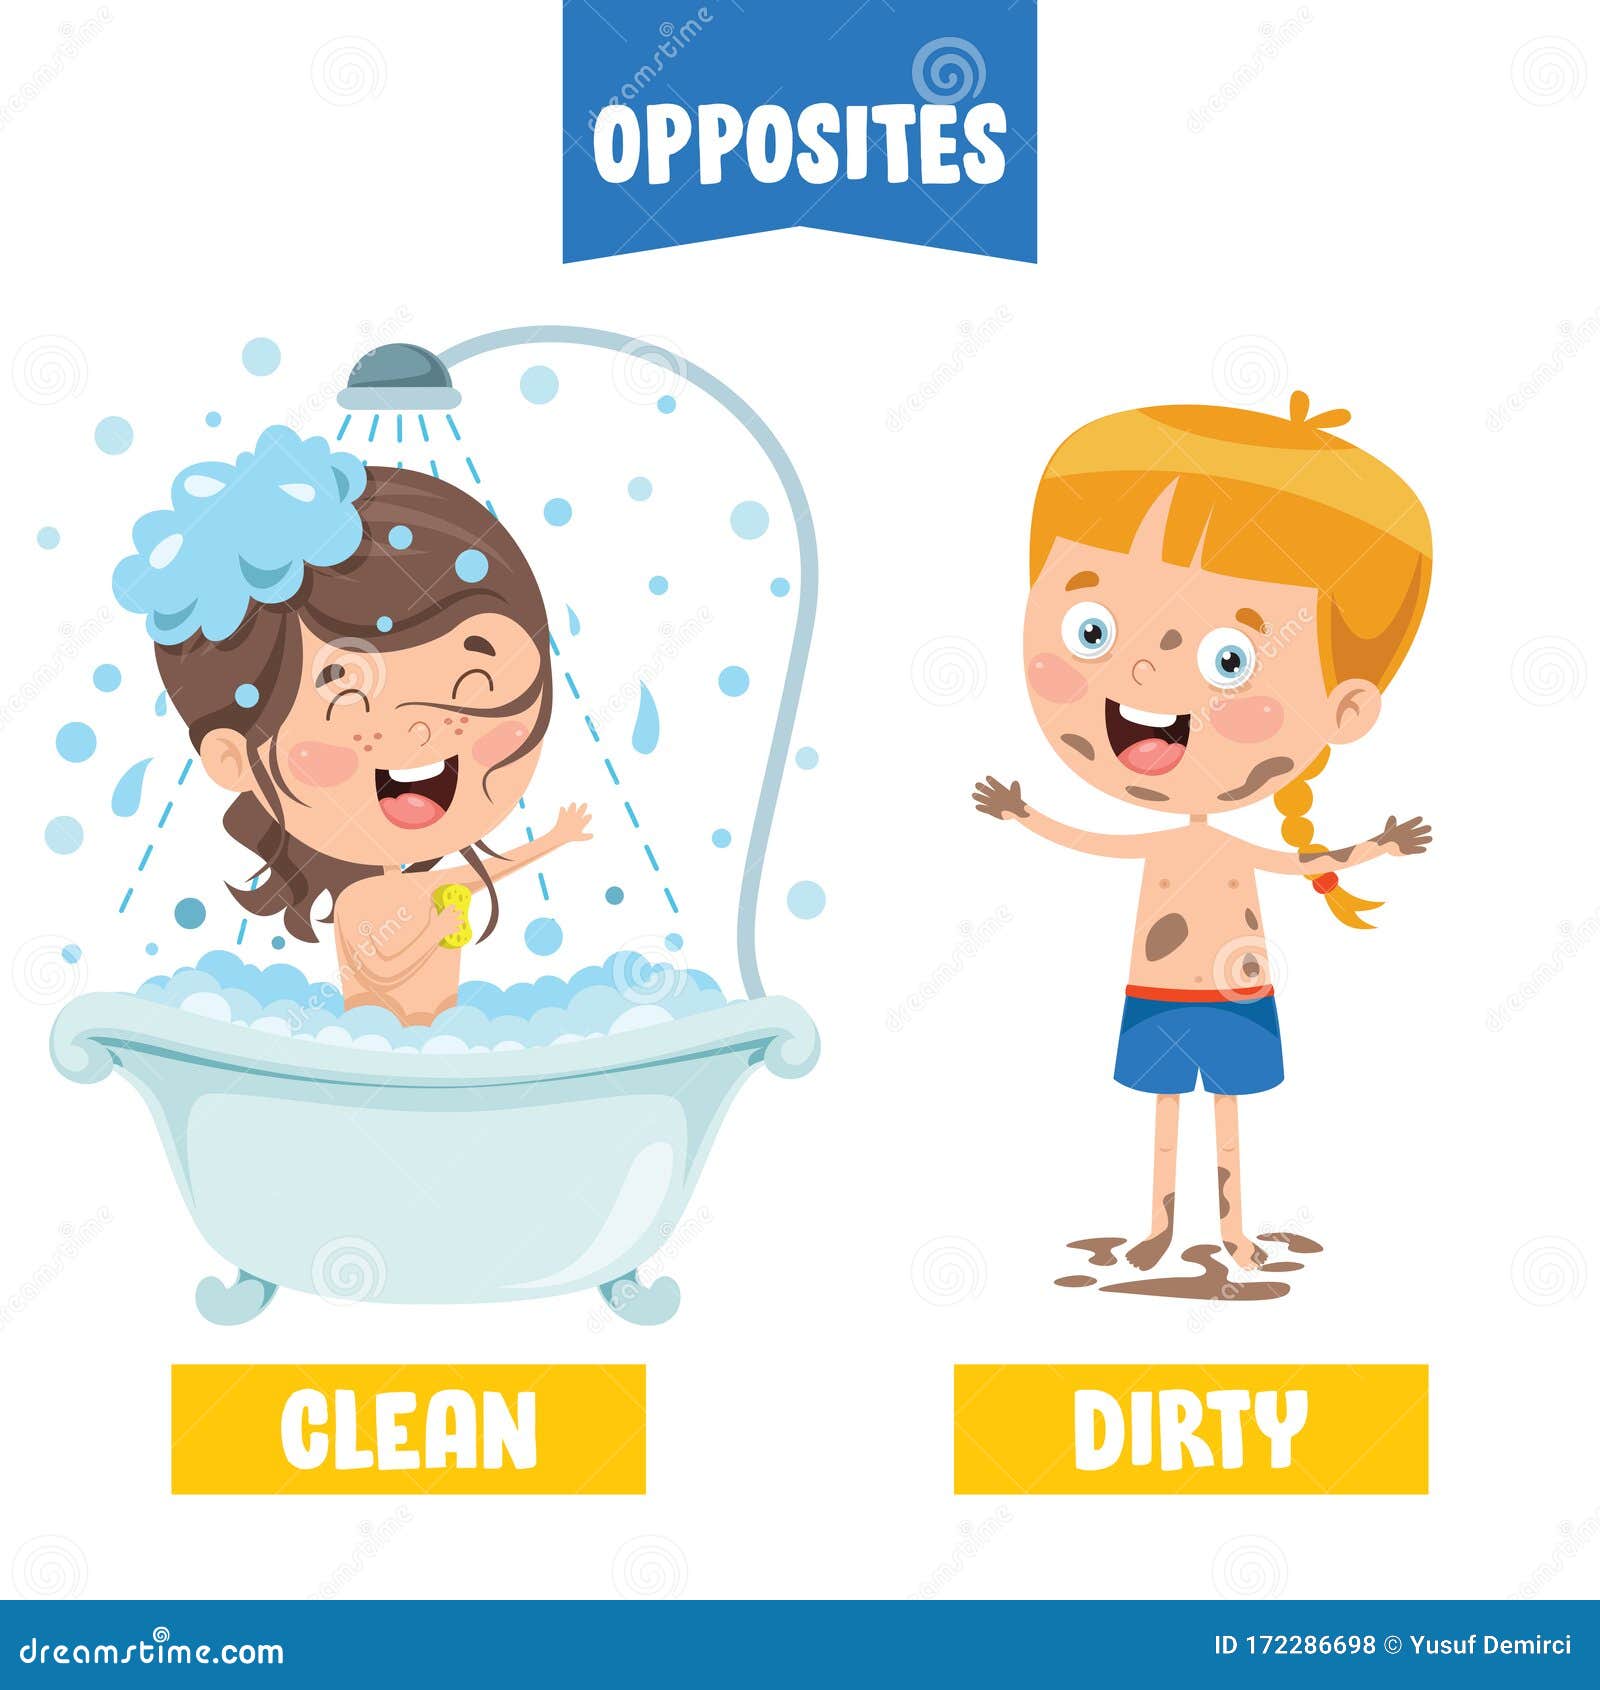 Opposite Adjectives with Cartoon Drawings Stock Vector - Illustration ...